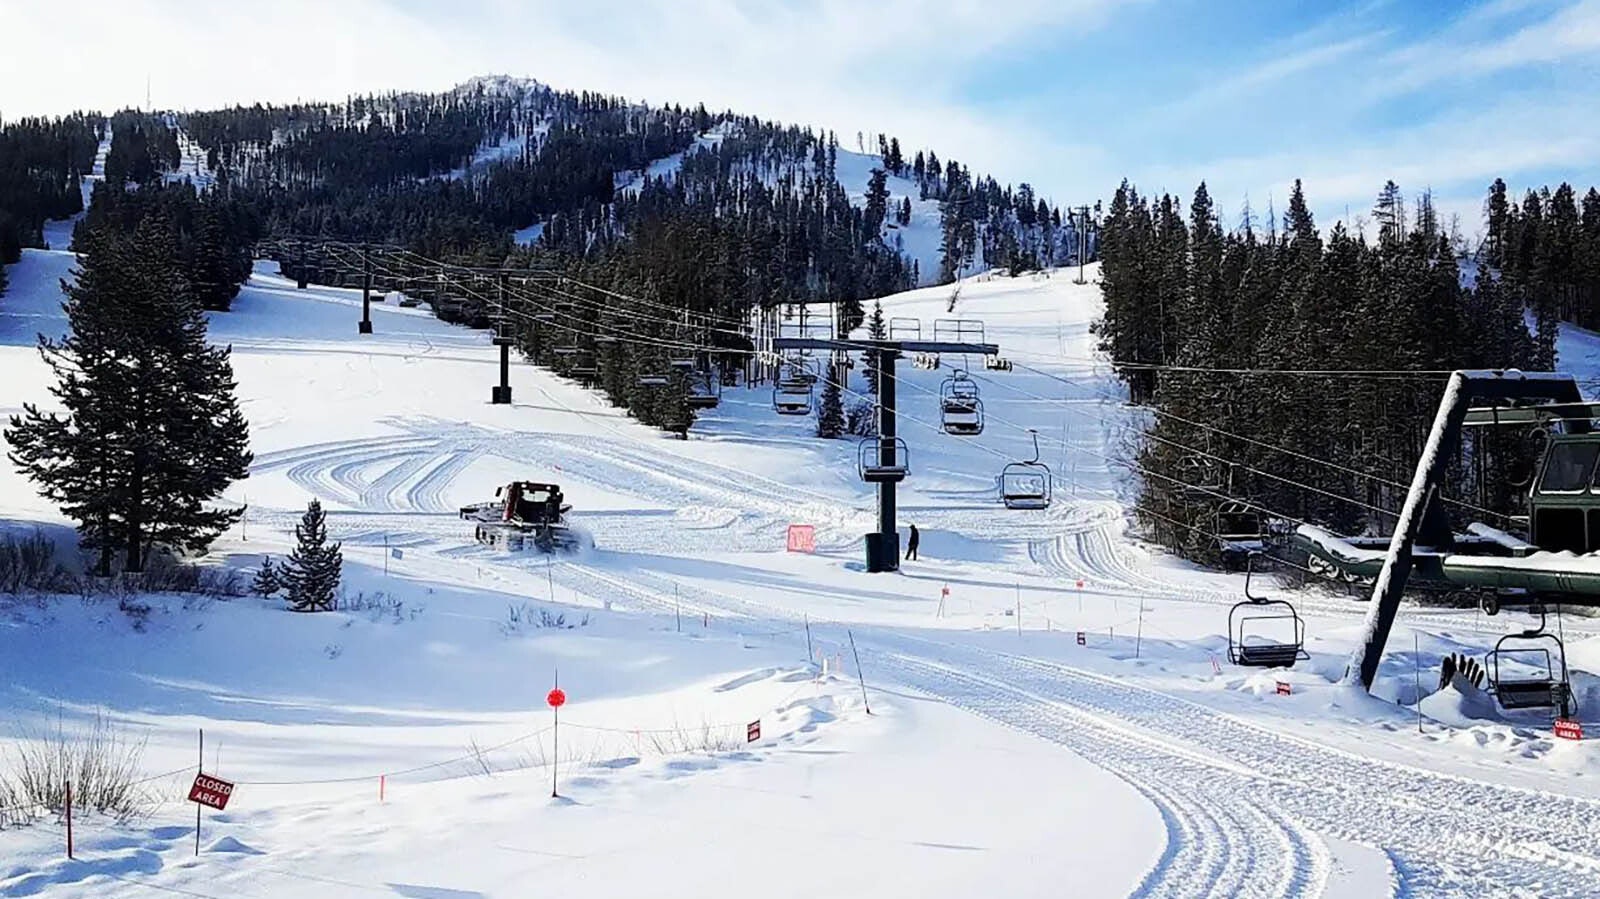 White Pine Ski and Summer Resort near Pinedale, Wyoming, is being bought by Wyoming billionaire Joe Ricketts.